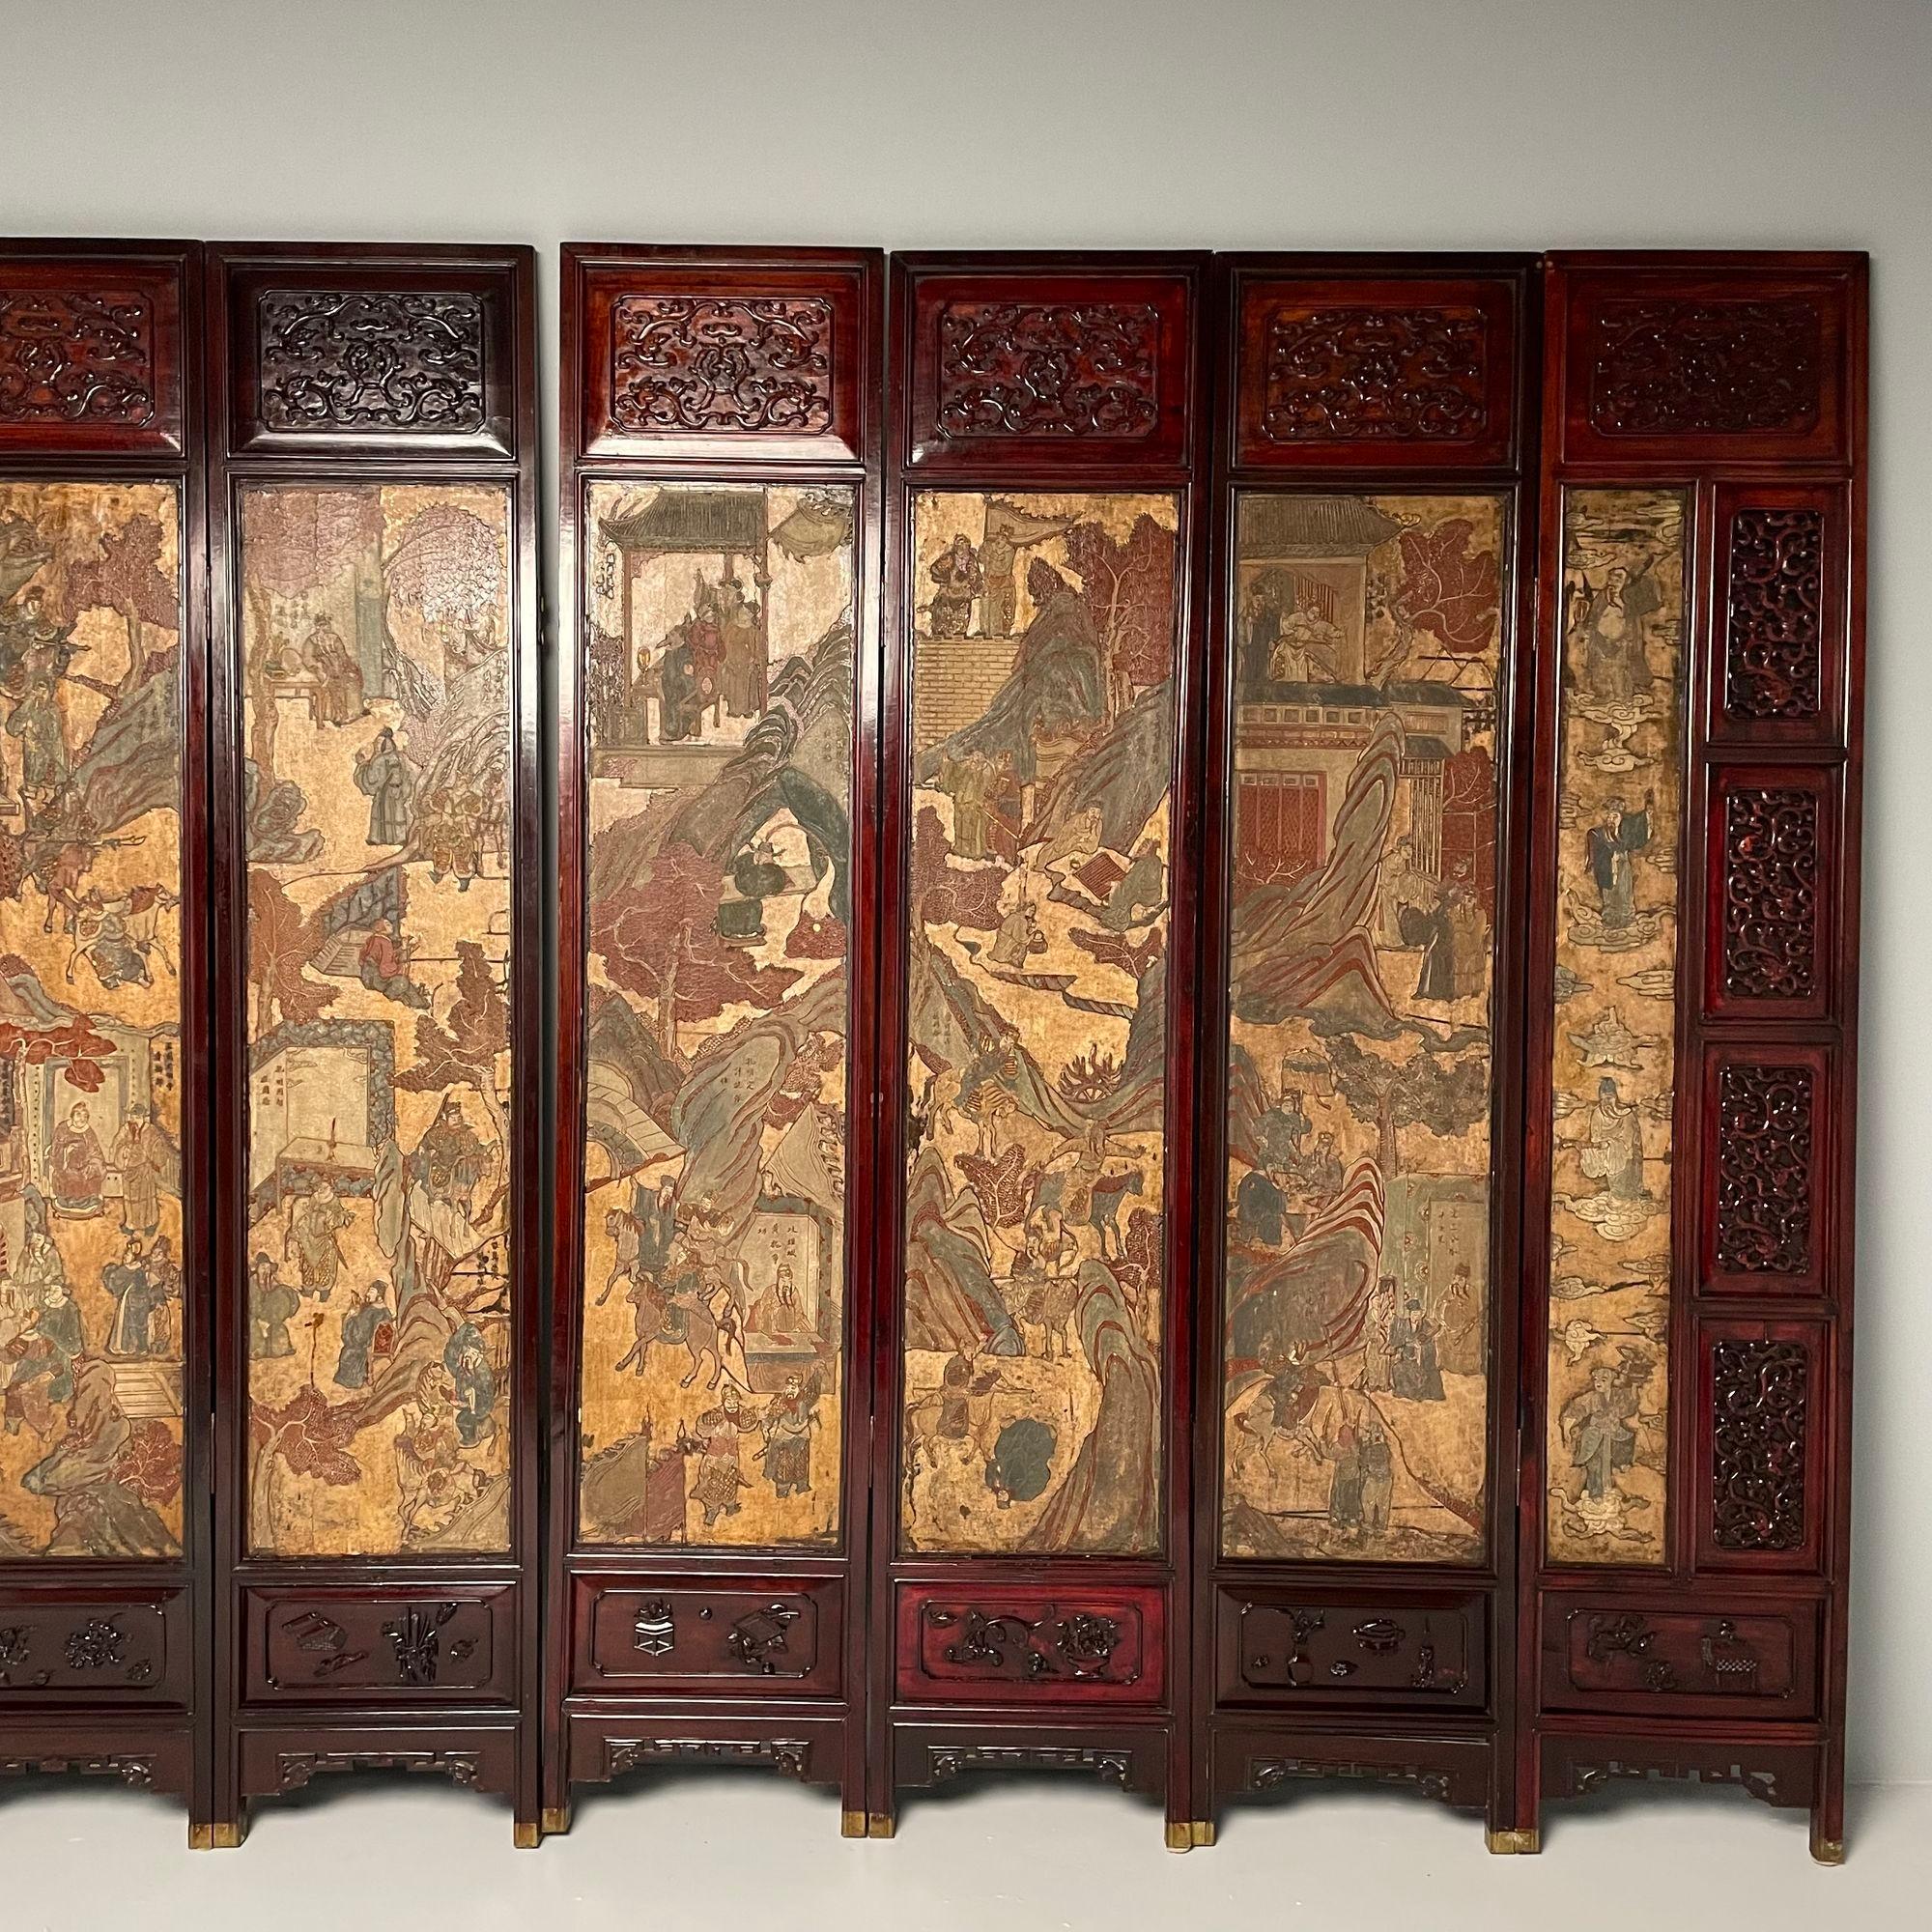 Unusual Eight Panel Chinese Coromandel Screen circa 1700-1800 with Carved Frame For Sale 4